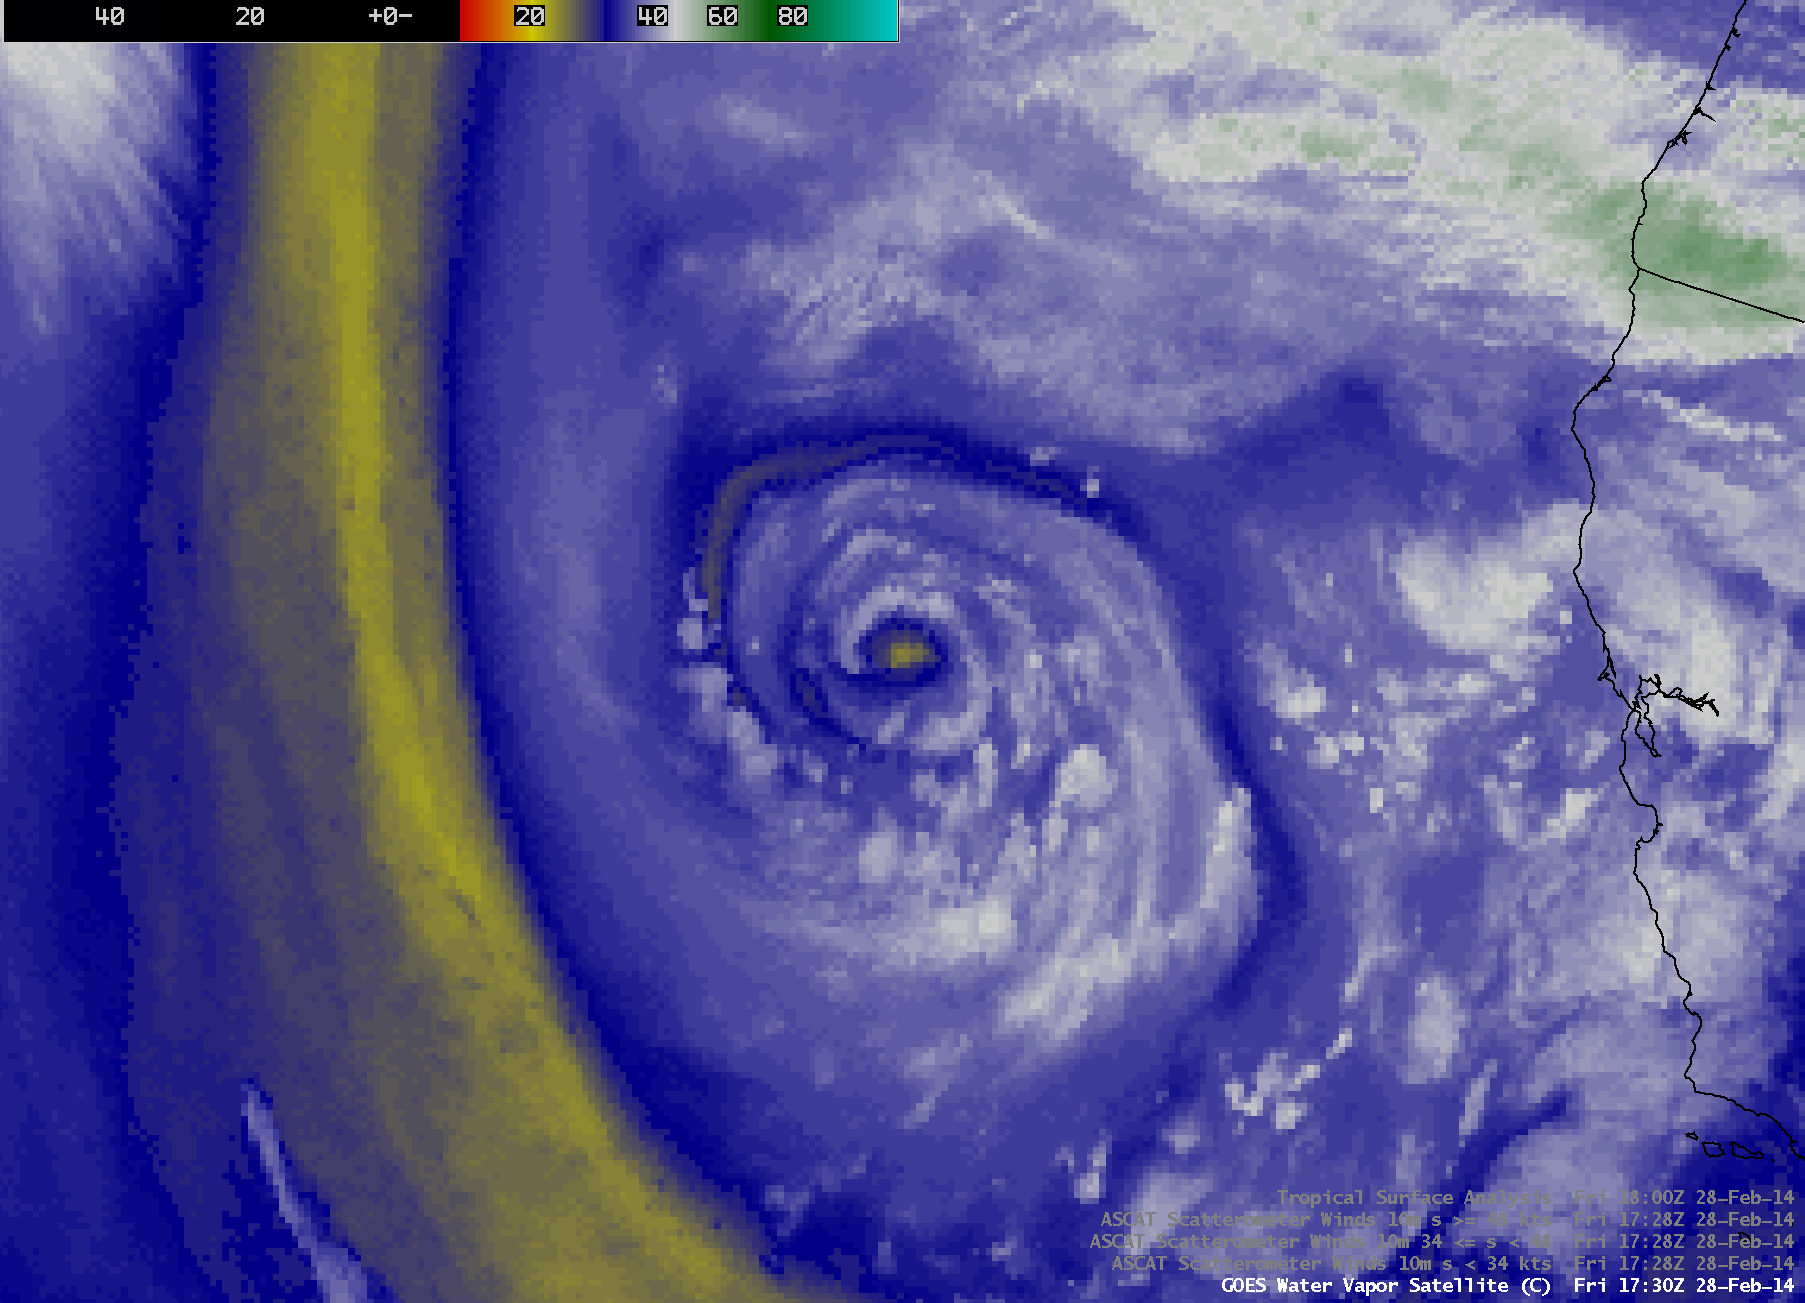 GOES-15 6.5 Âµm water vapor channel image with ASCAT surface scatterometer winds and surface analysis